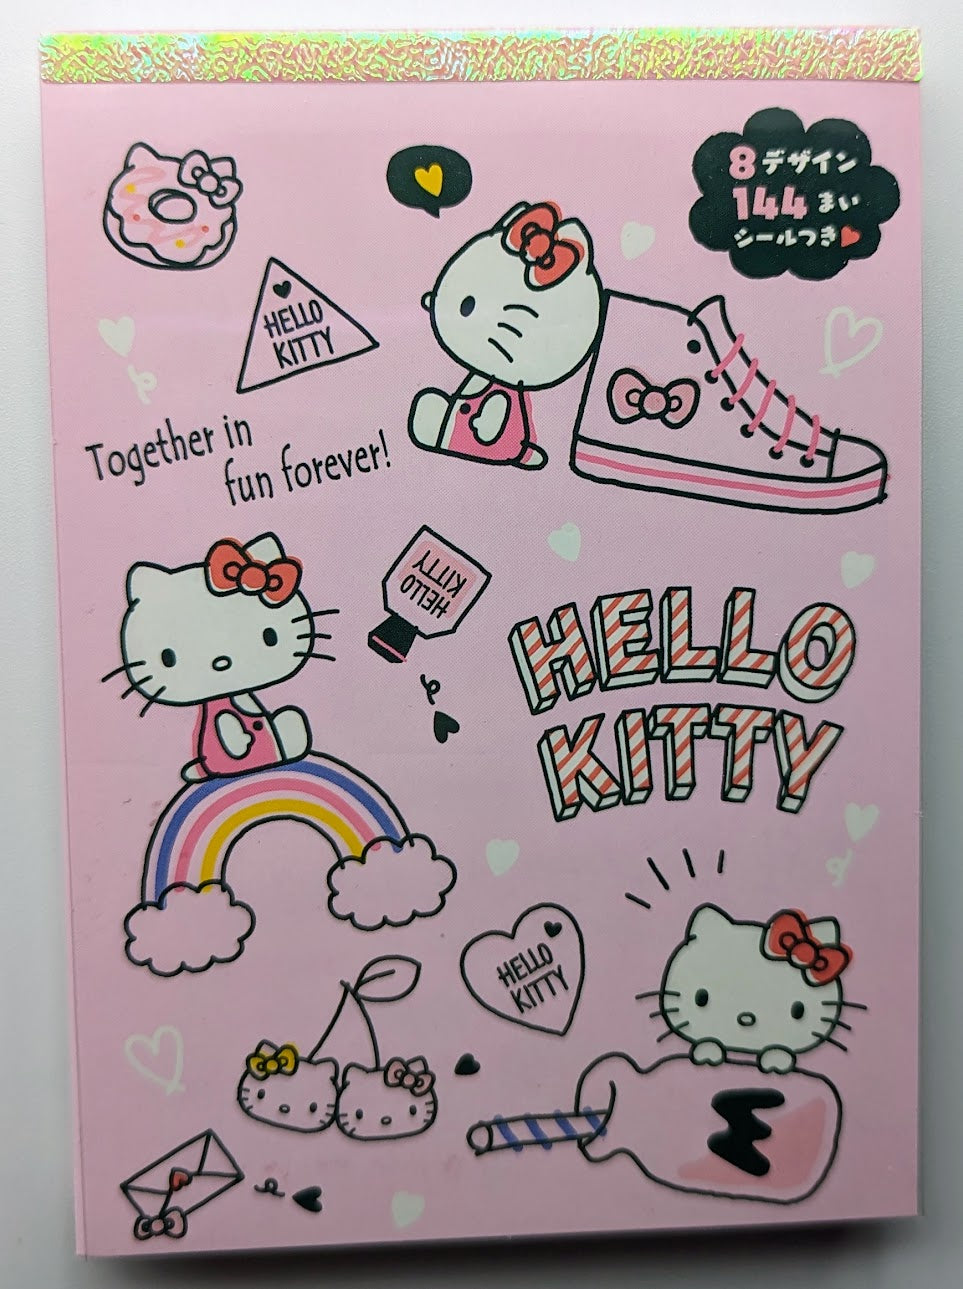 Hello Kitty Notepads with Stickers